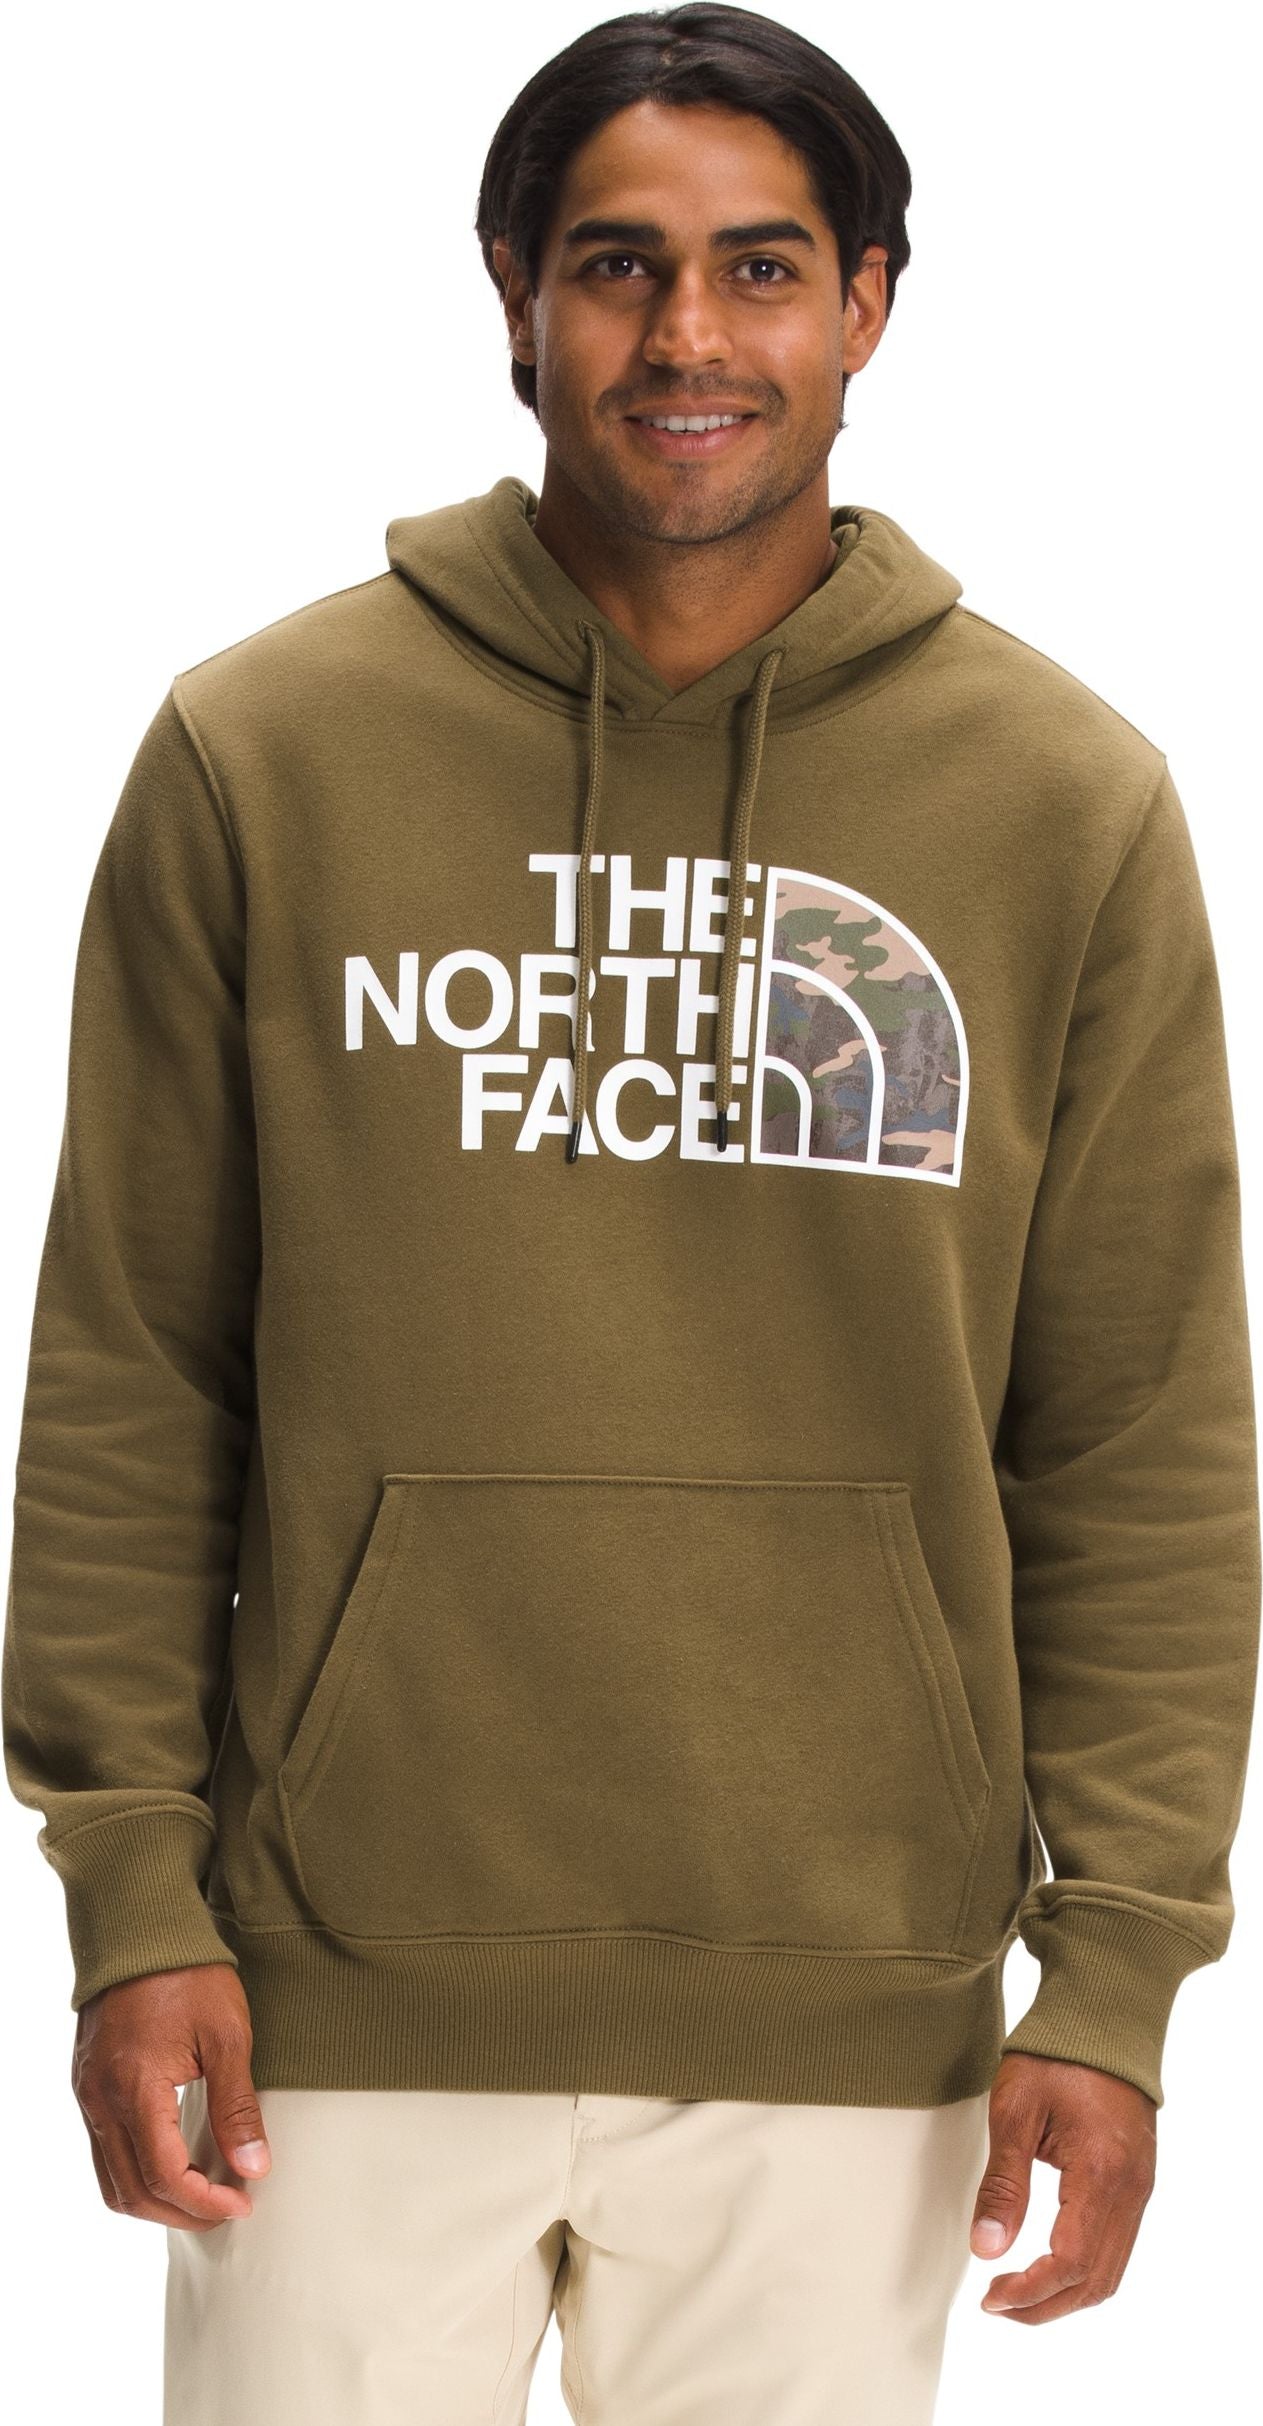 The North Face Apparel Men's Half Dome Pullover Hoodie Military Olive/multi Color Print